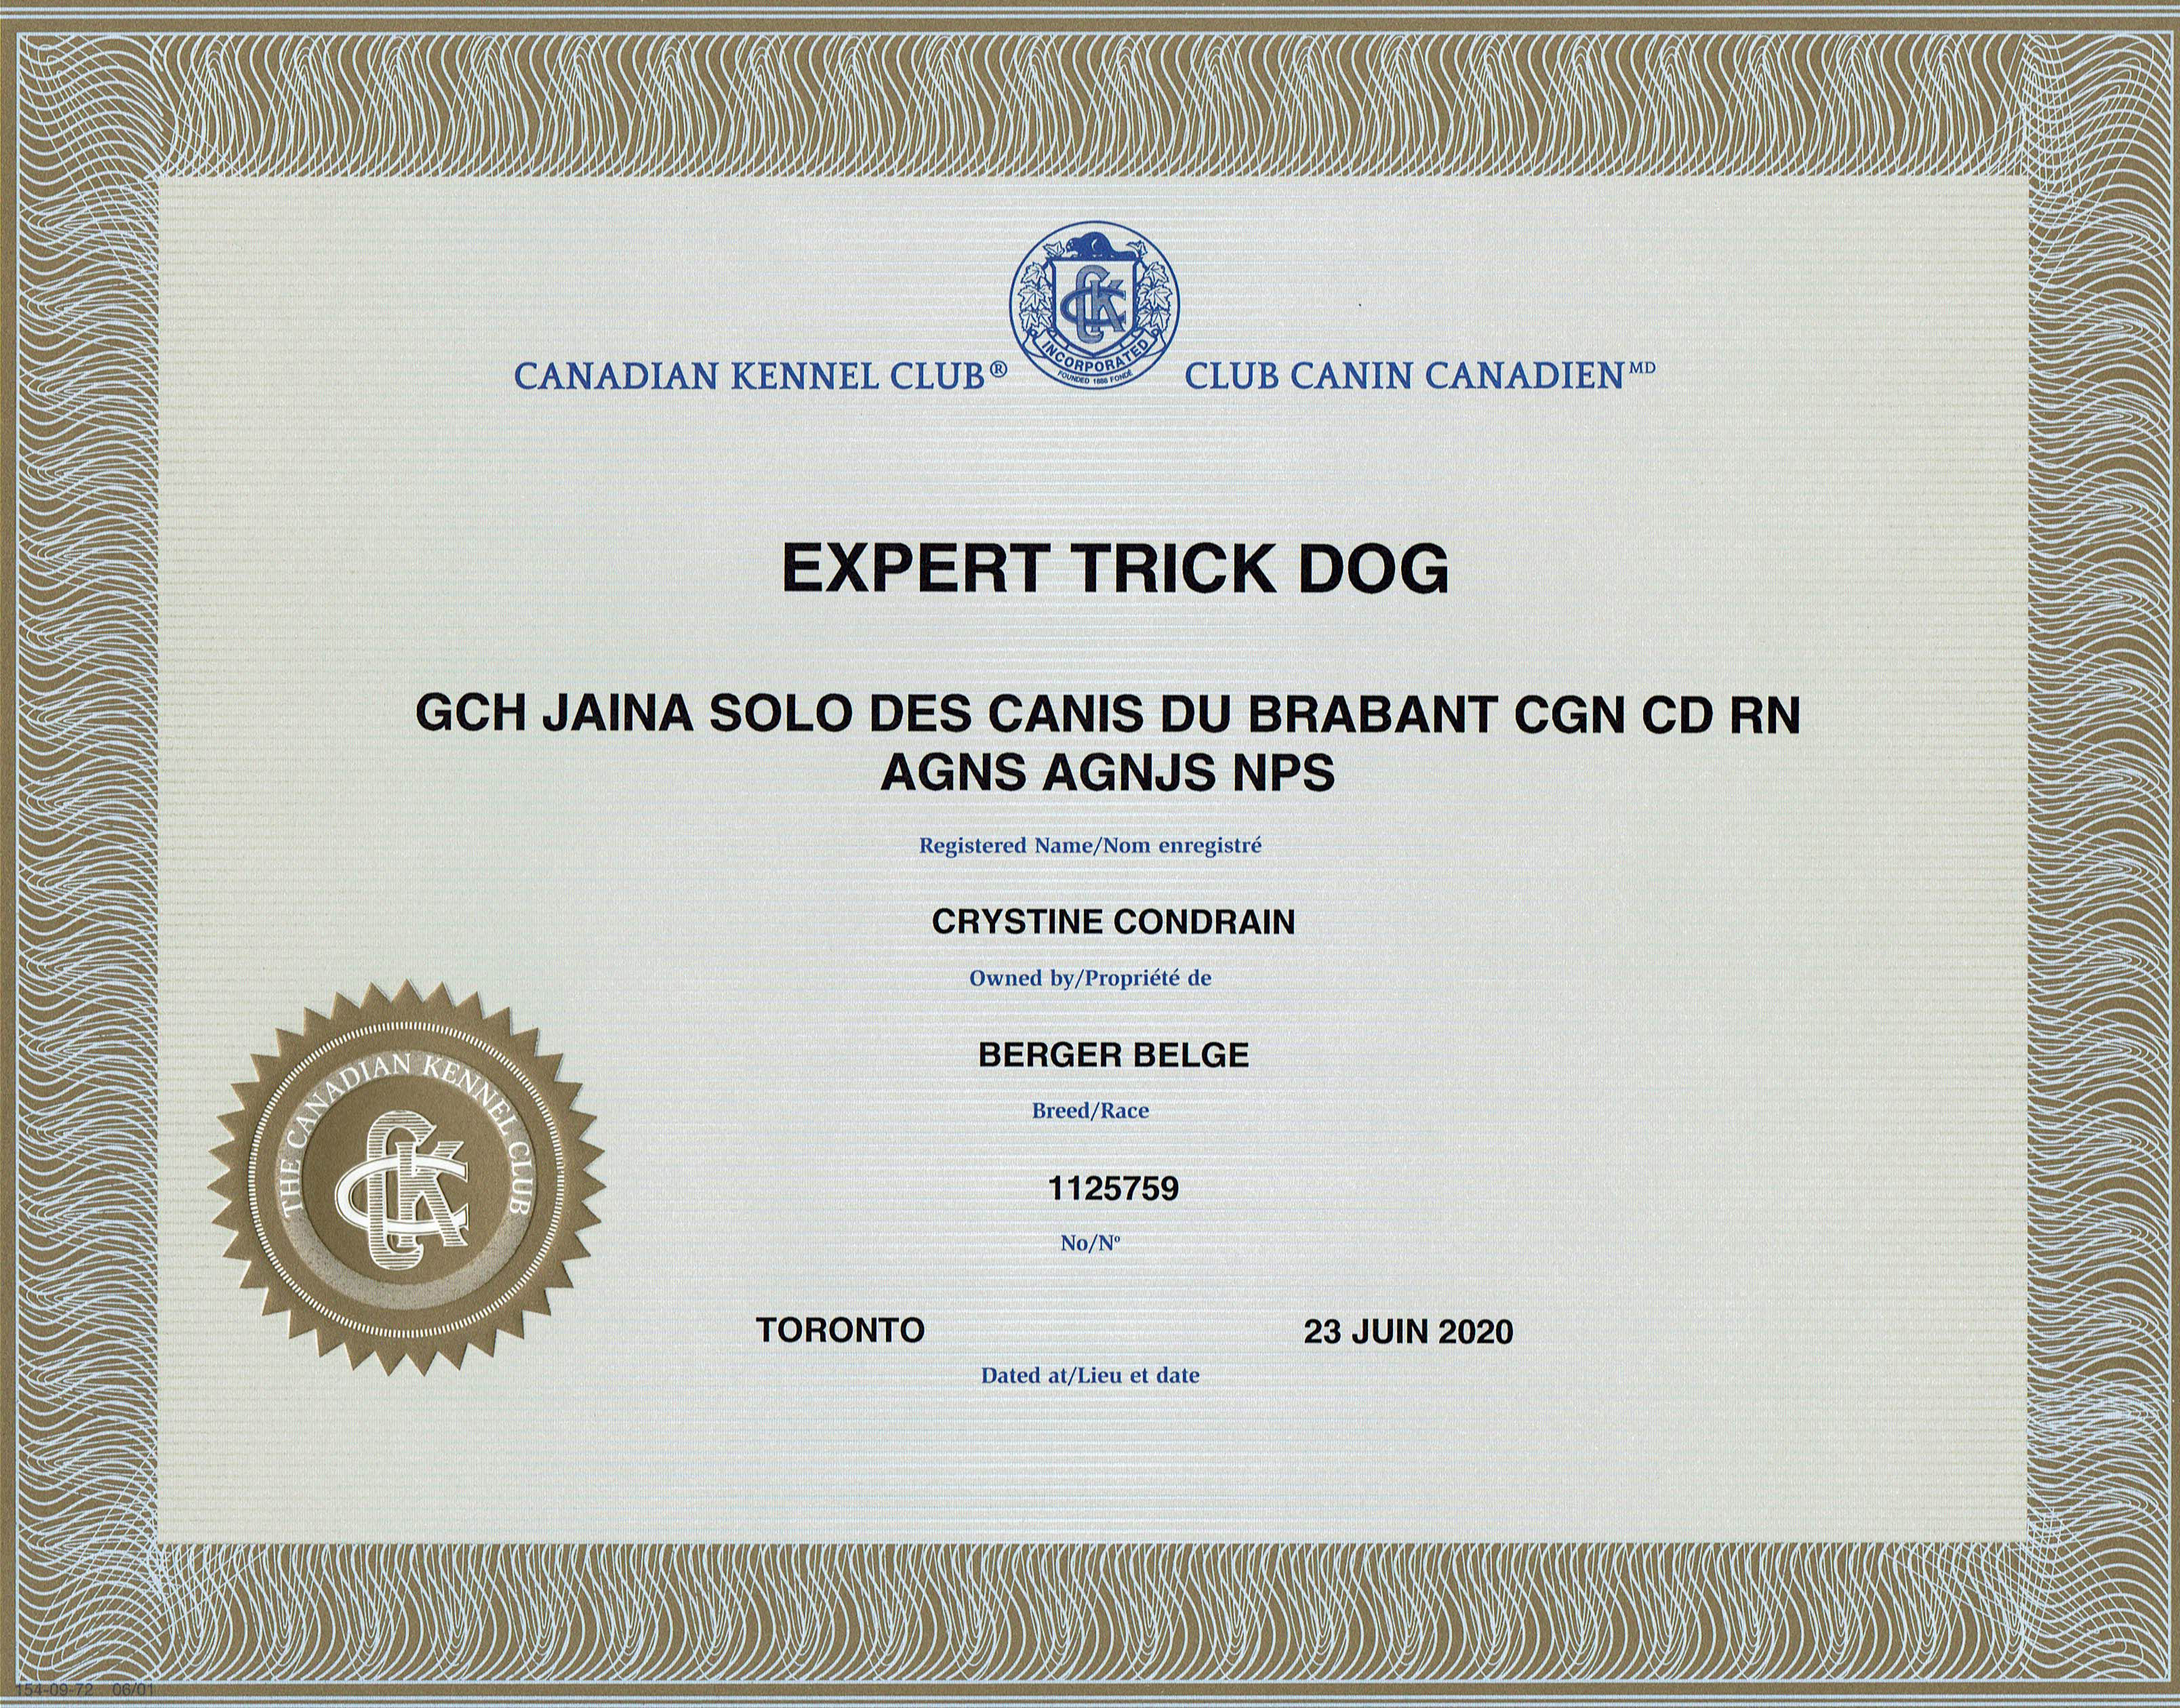 Expert Trick Dog from the Canadian Kennel Club for Jaina